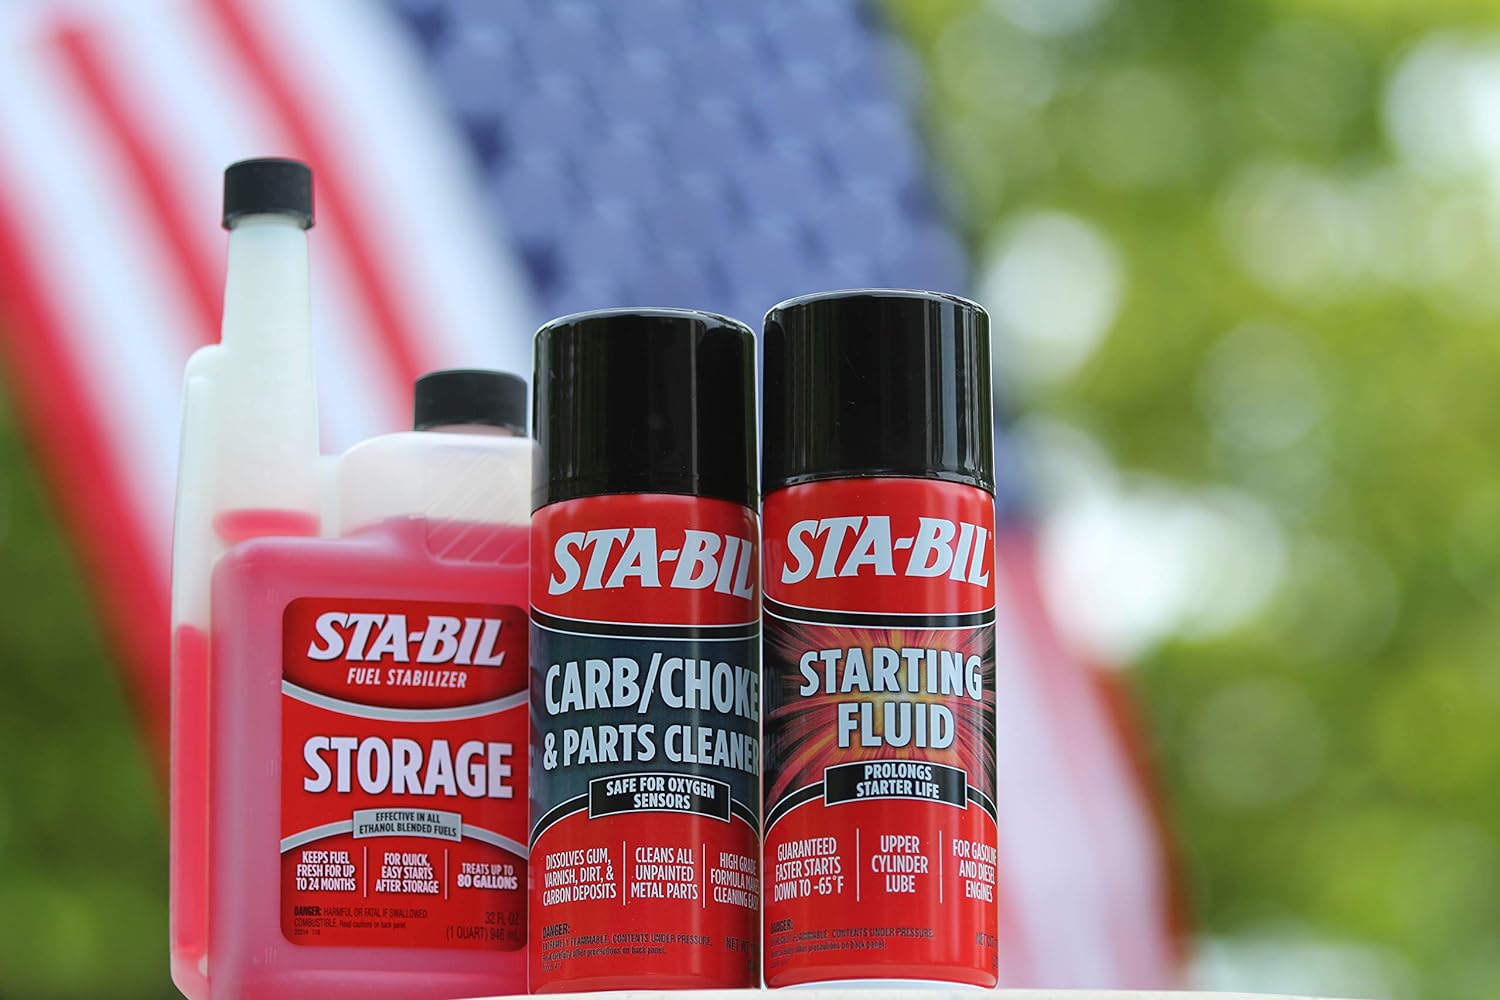 STA-BIL Storage Fuel Stabilizer - Keeps Fuel Fresh for 24 Months - Prevents Corrosion - Gasoline Treatment that Protects Fuel System - Fuel Saver - Treats 80 Gallons - 32 Fl. Oz. (22287)